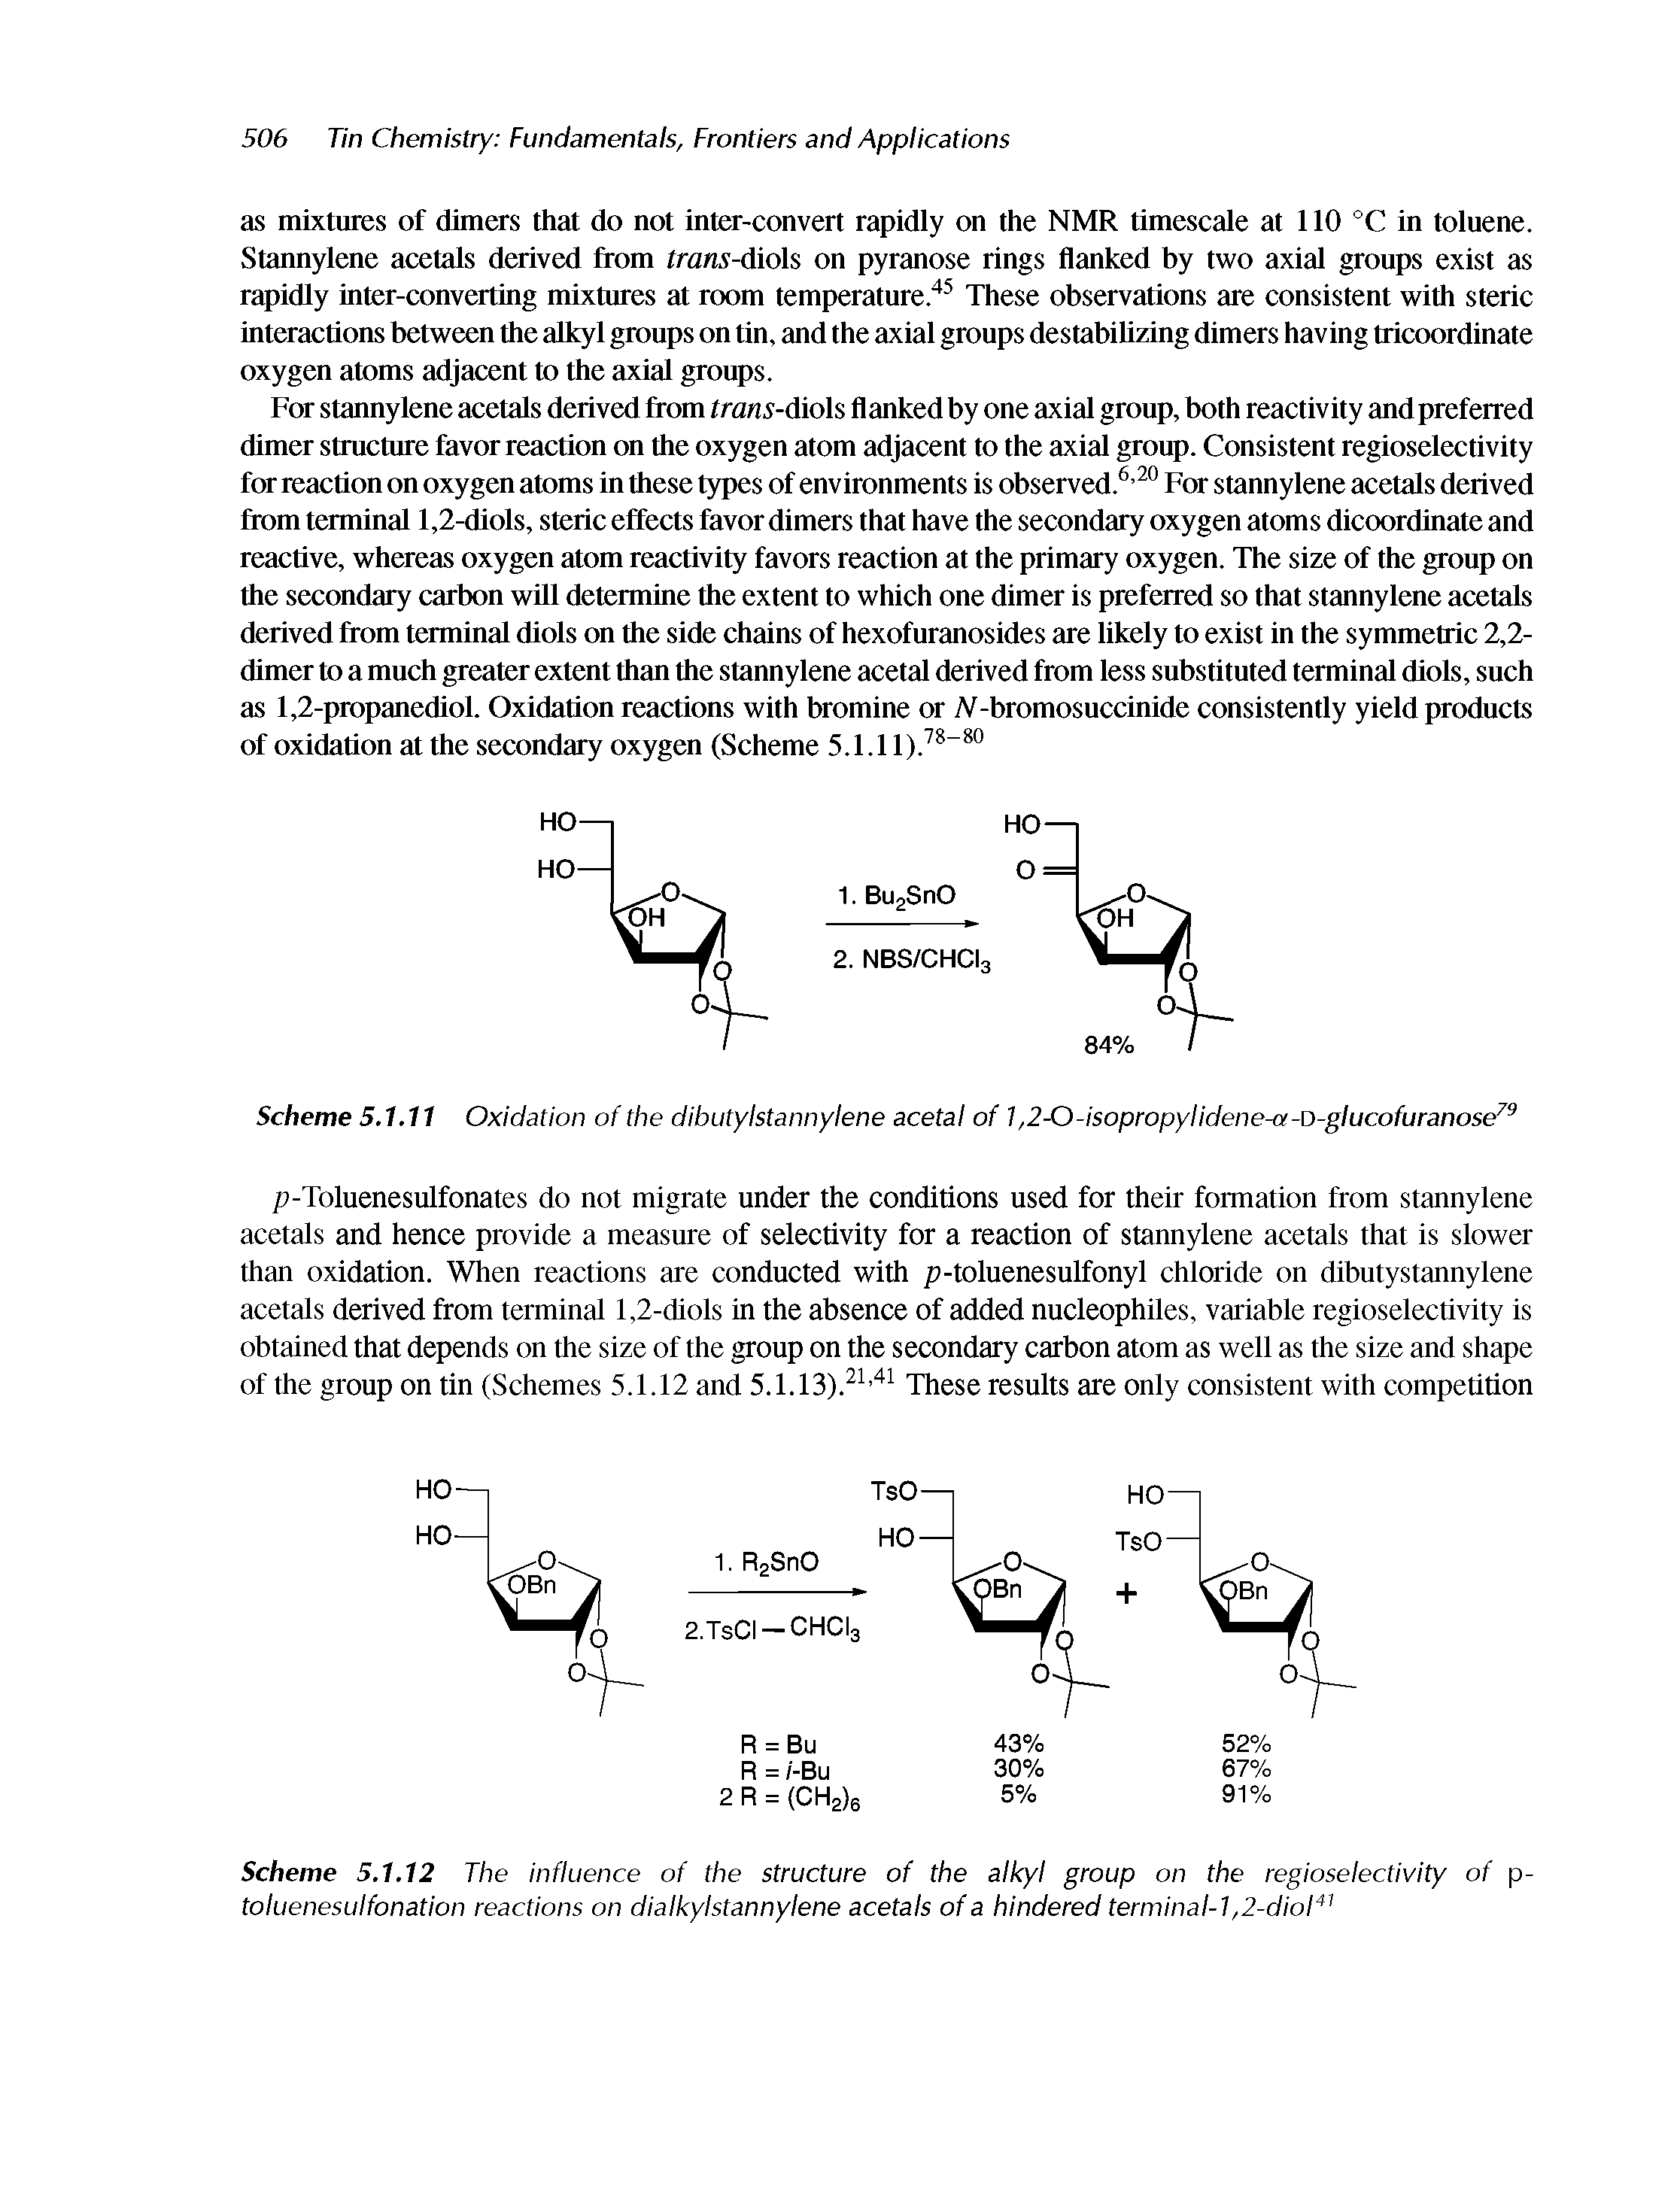 Scheme 5.1.12 The influence of the structure of the alkyl group on the regioselectivity of p-toluenesulfonation reactions on dialkylstannylene acetals of a hindered terminal-1,2-diol" ...